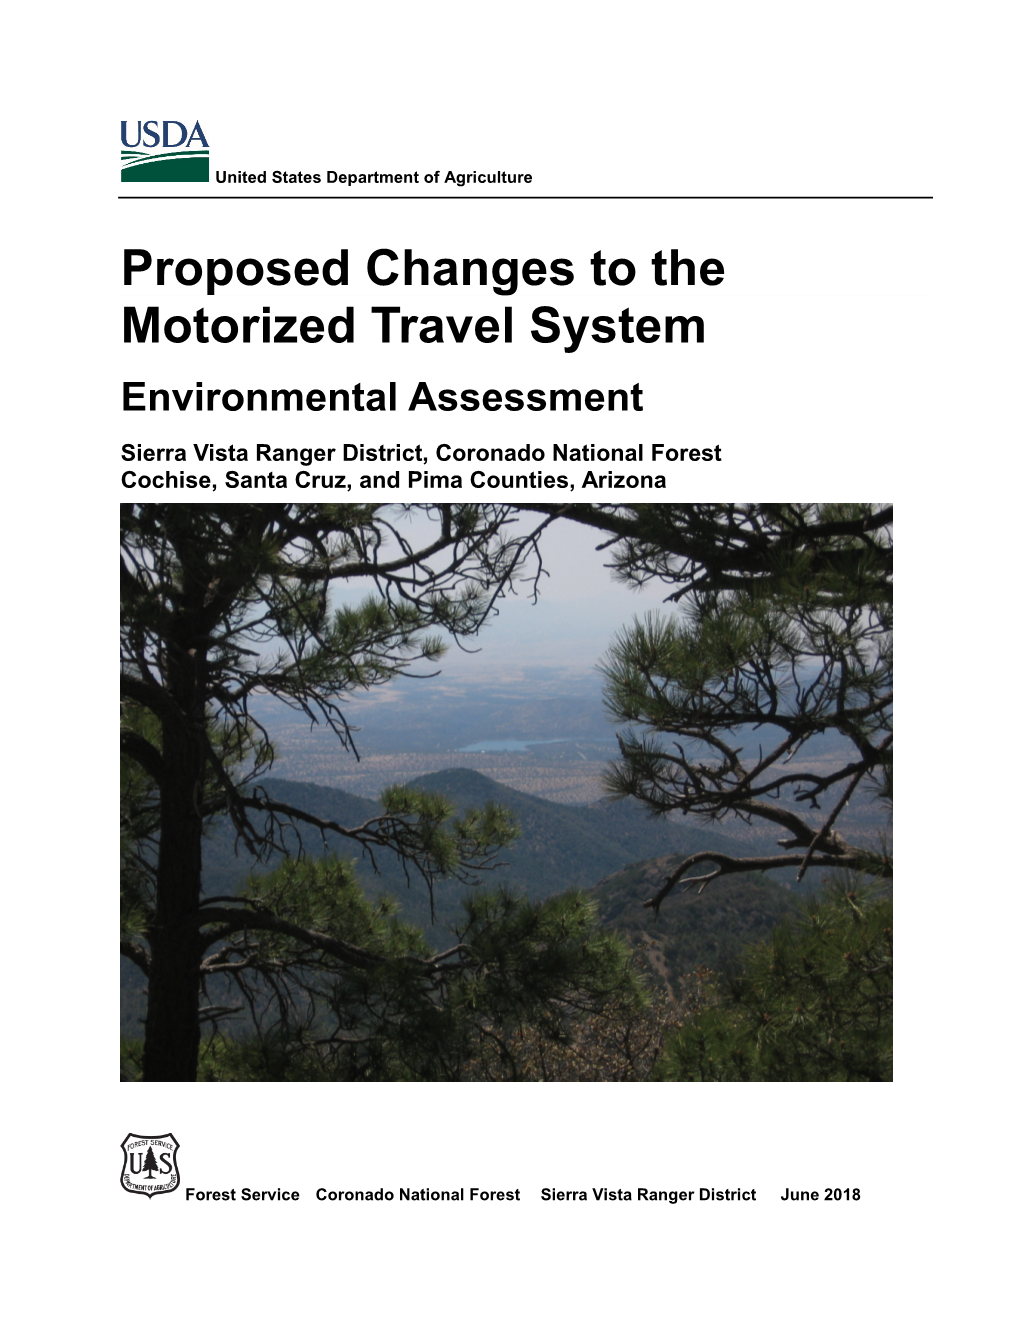 Proposed Changes to the Motorized Travel System Environmental